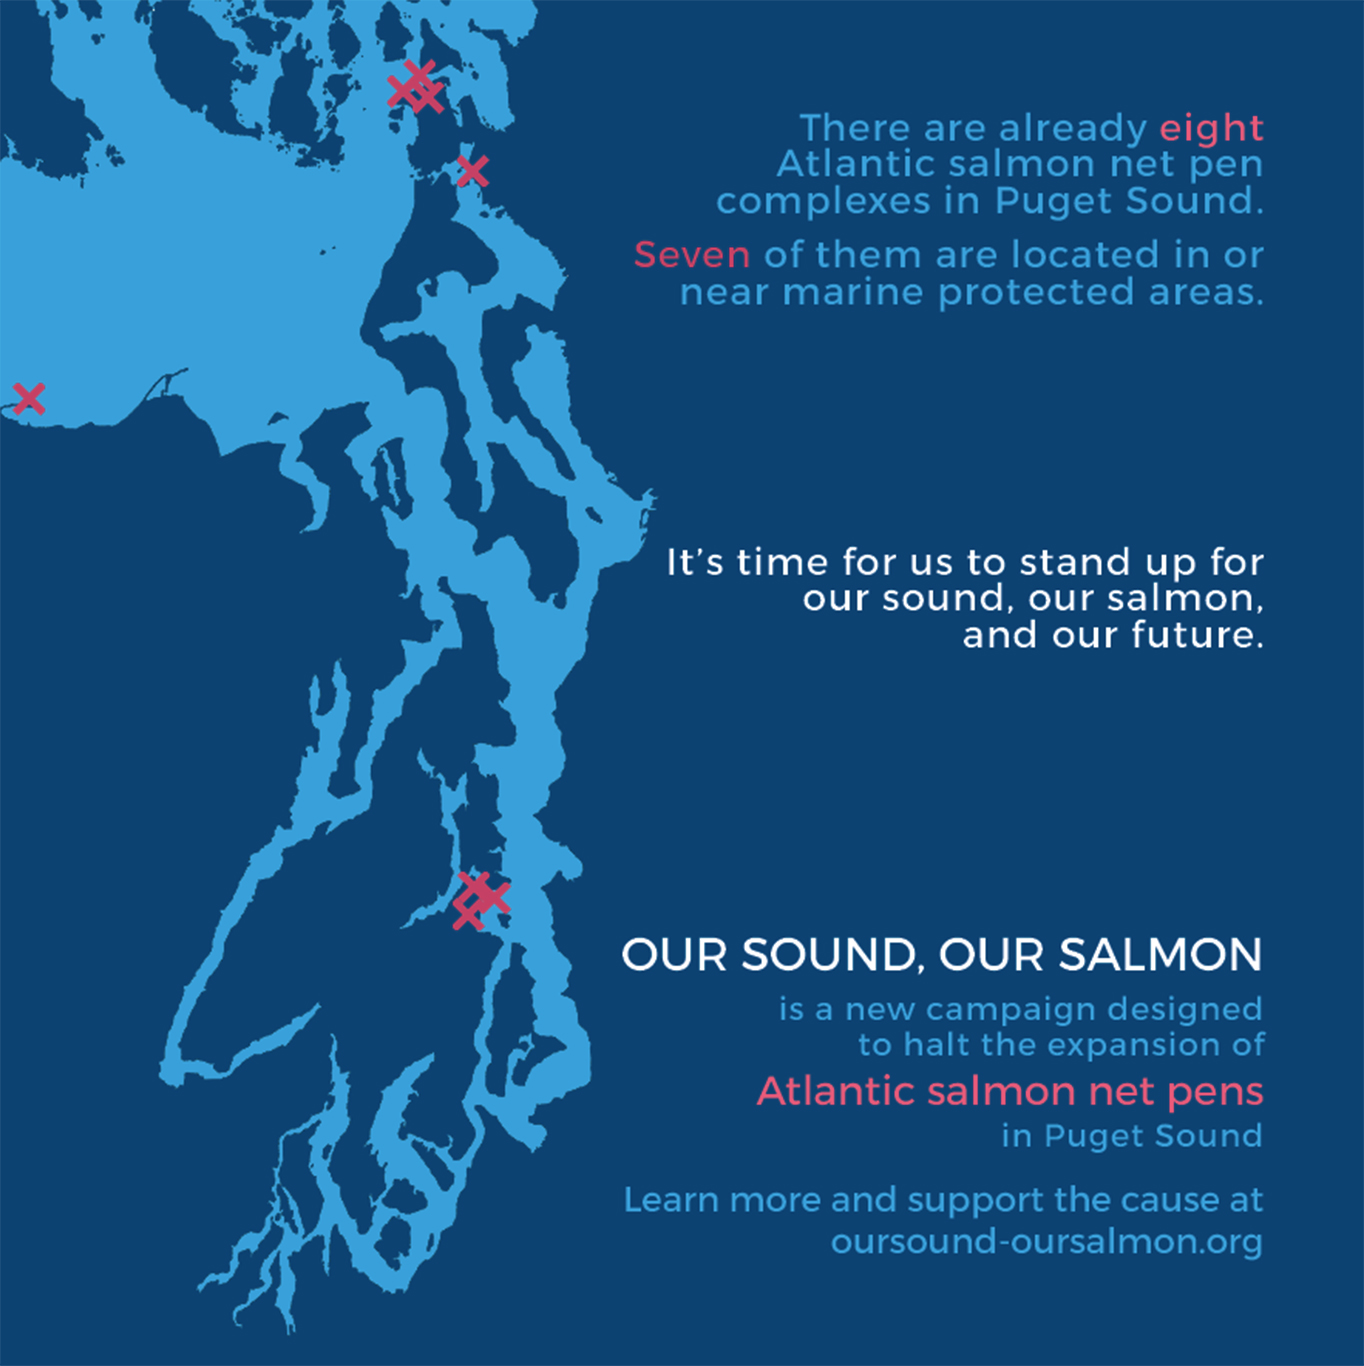 Existing Atlantic salmon net pen complexes in Puget Sound